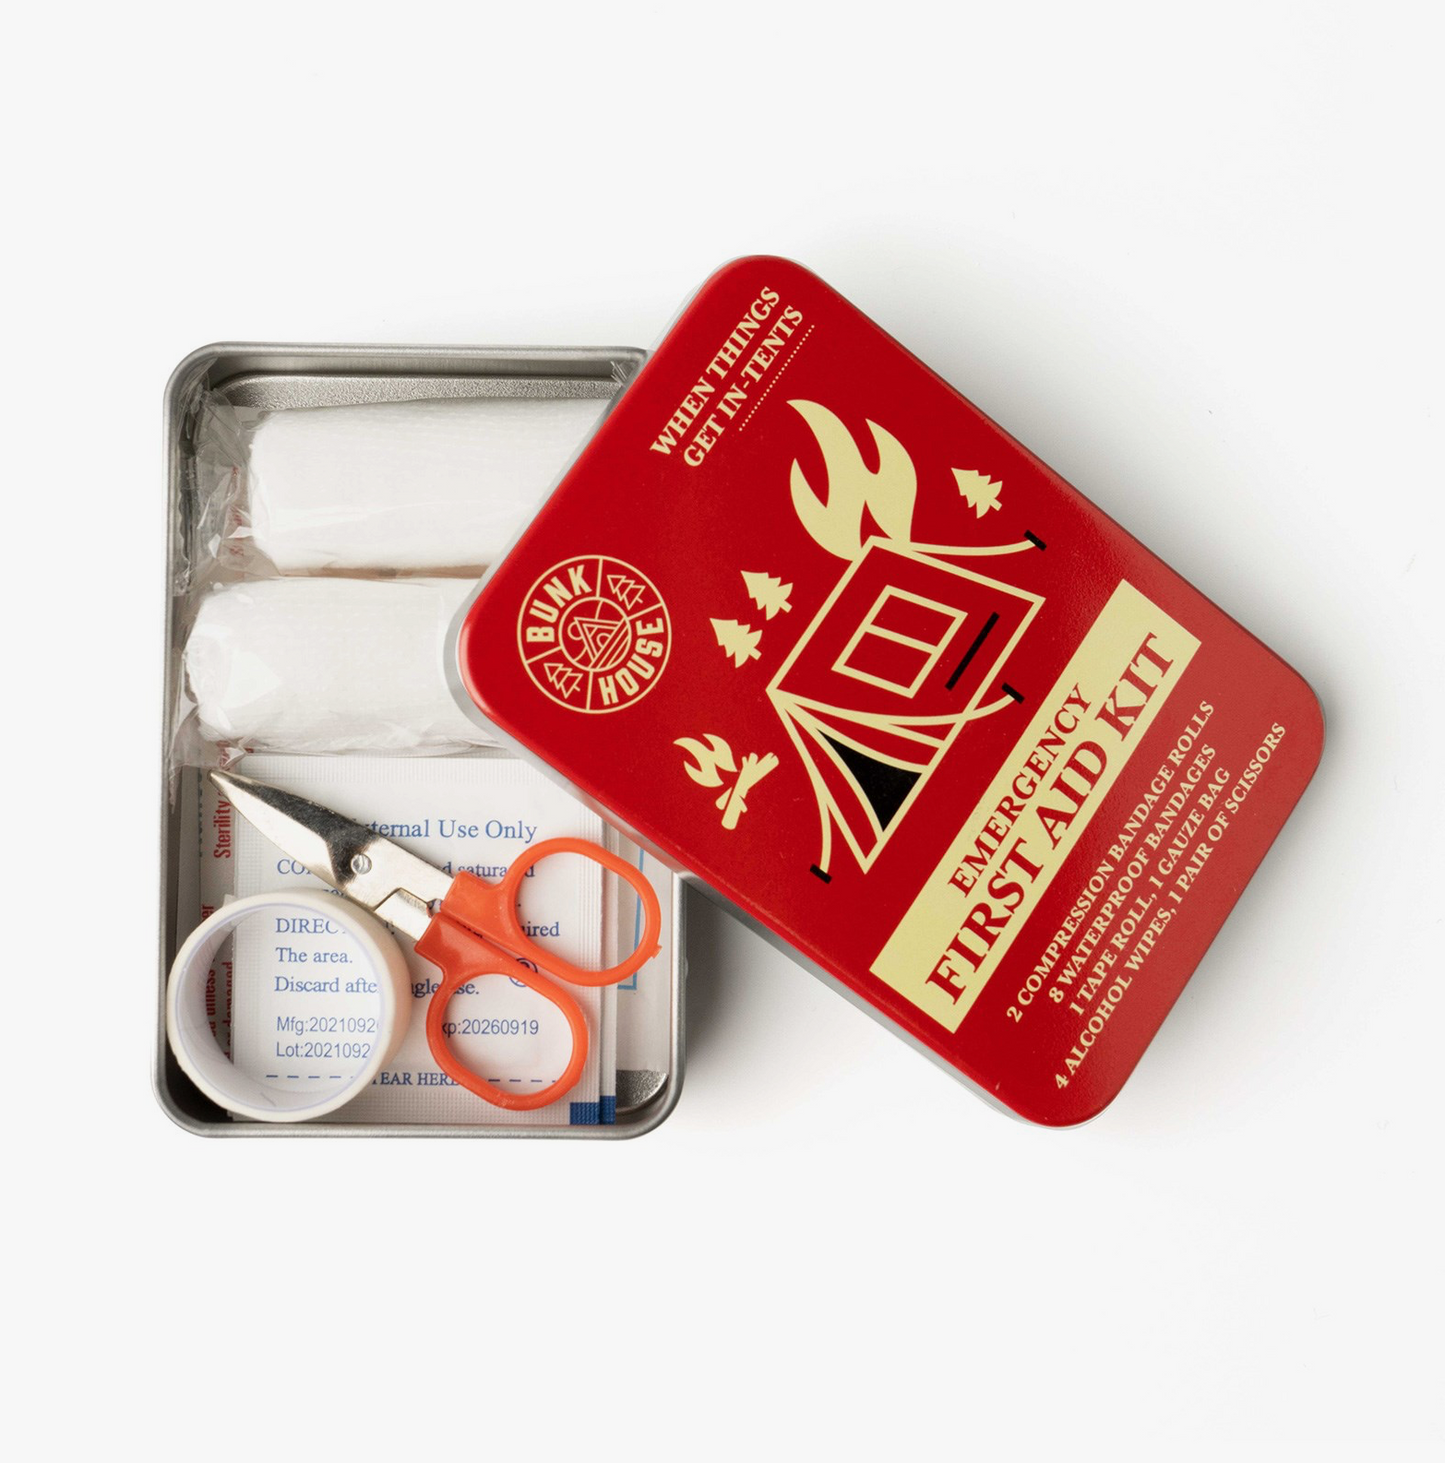 EMERGENCY FIRST AID KIT IN TRAVEL TIN